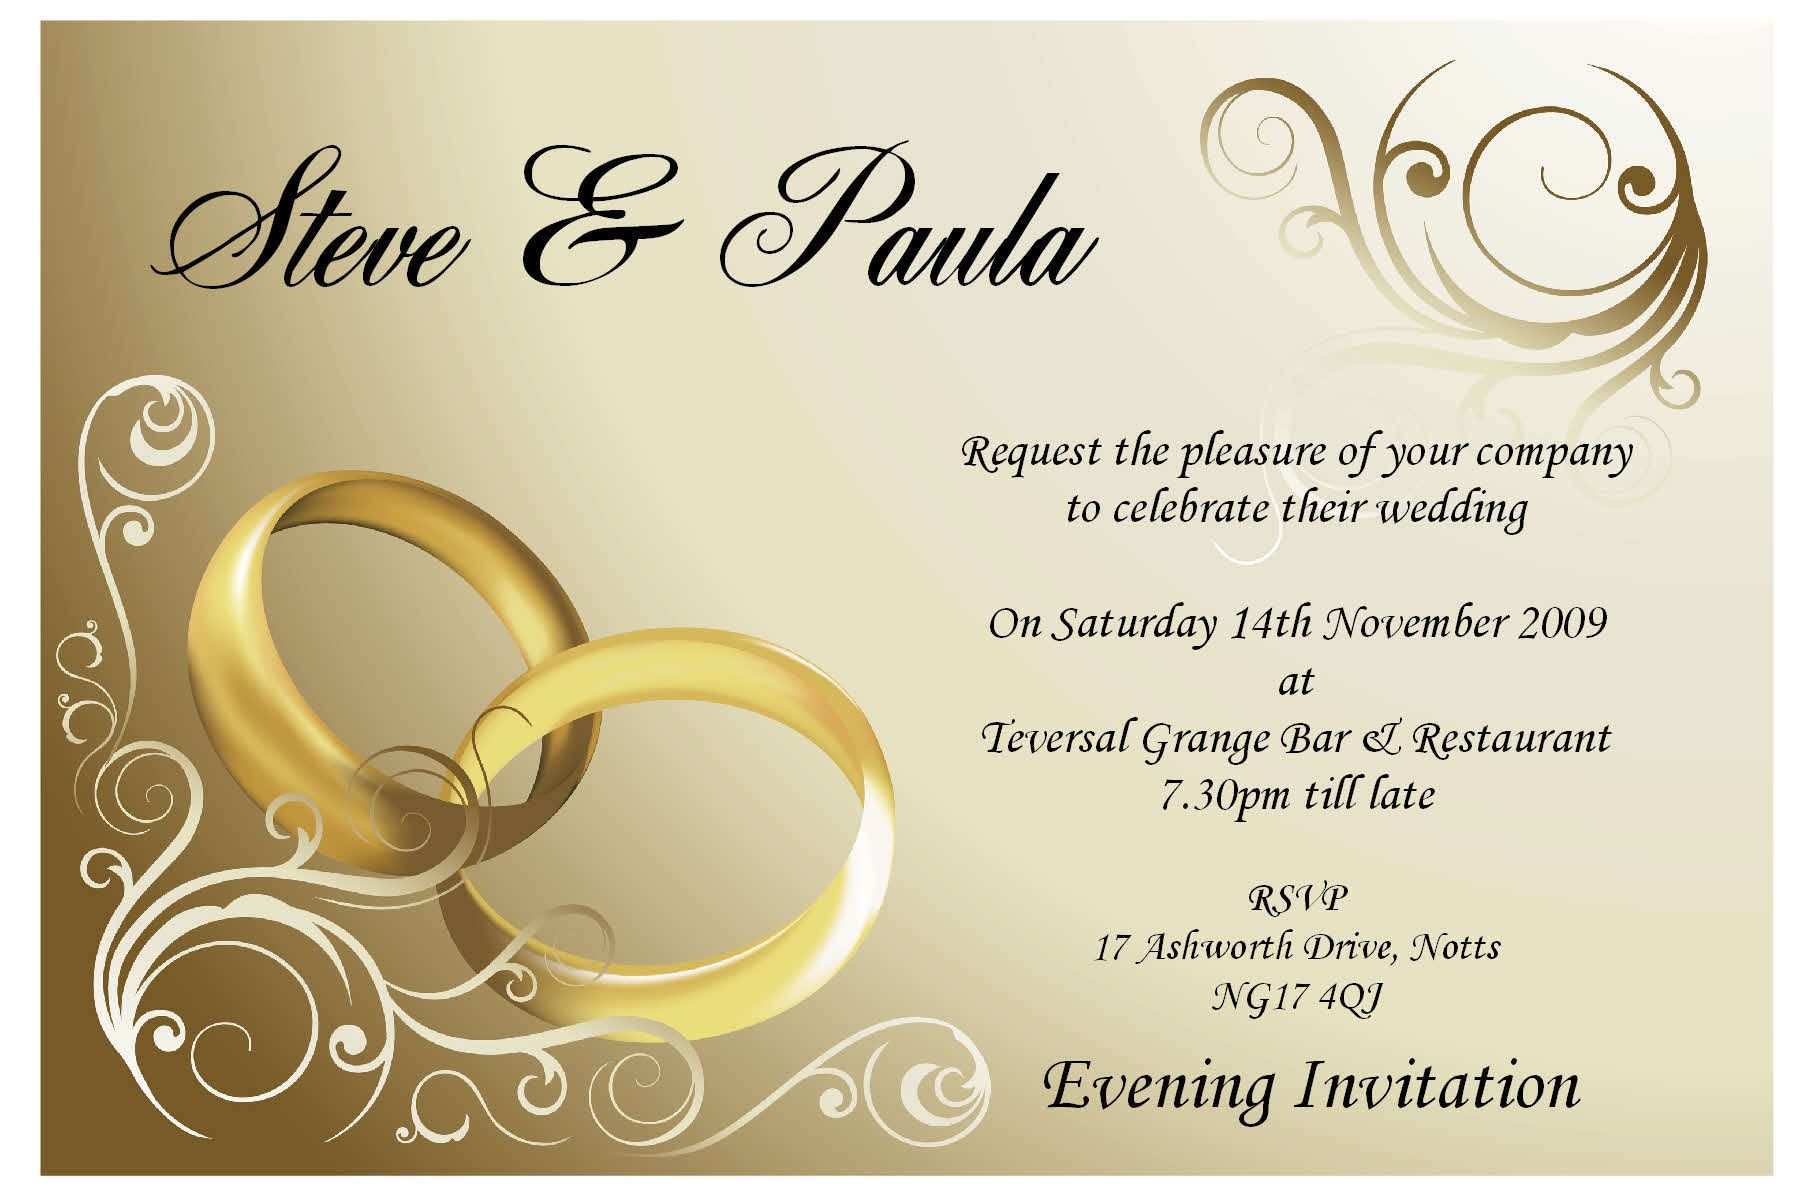 29 Online Invitation Card Template For Engagement With Stunning Design for Invitation Card Template For Engagement